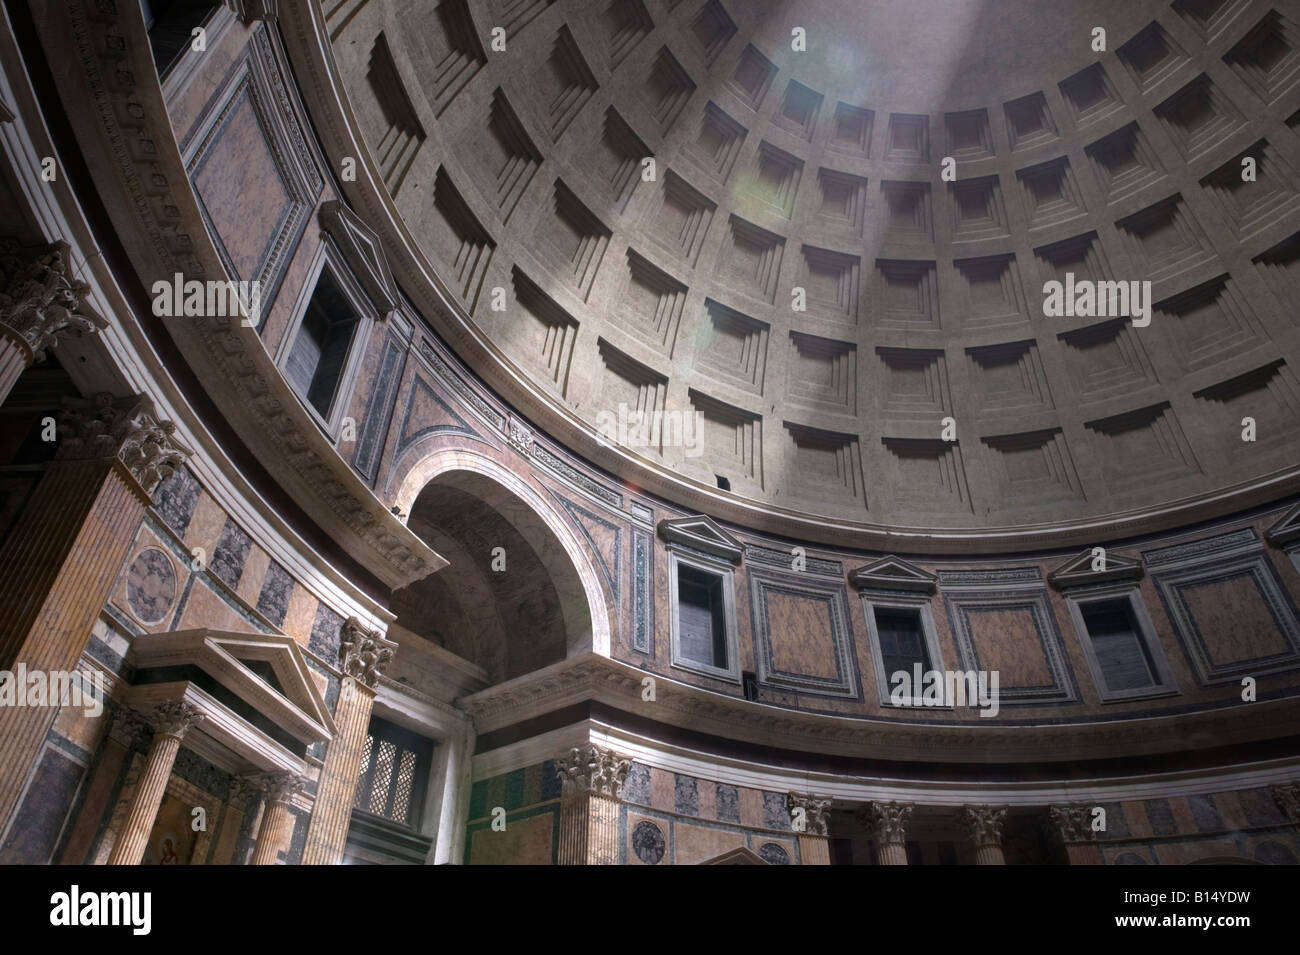 Interior view of the Pantheon, Rome, Italy Stock Photo